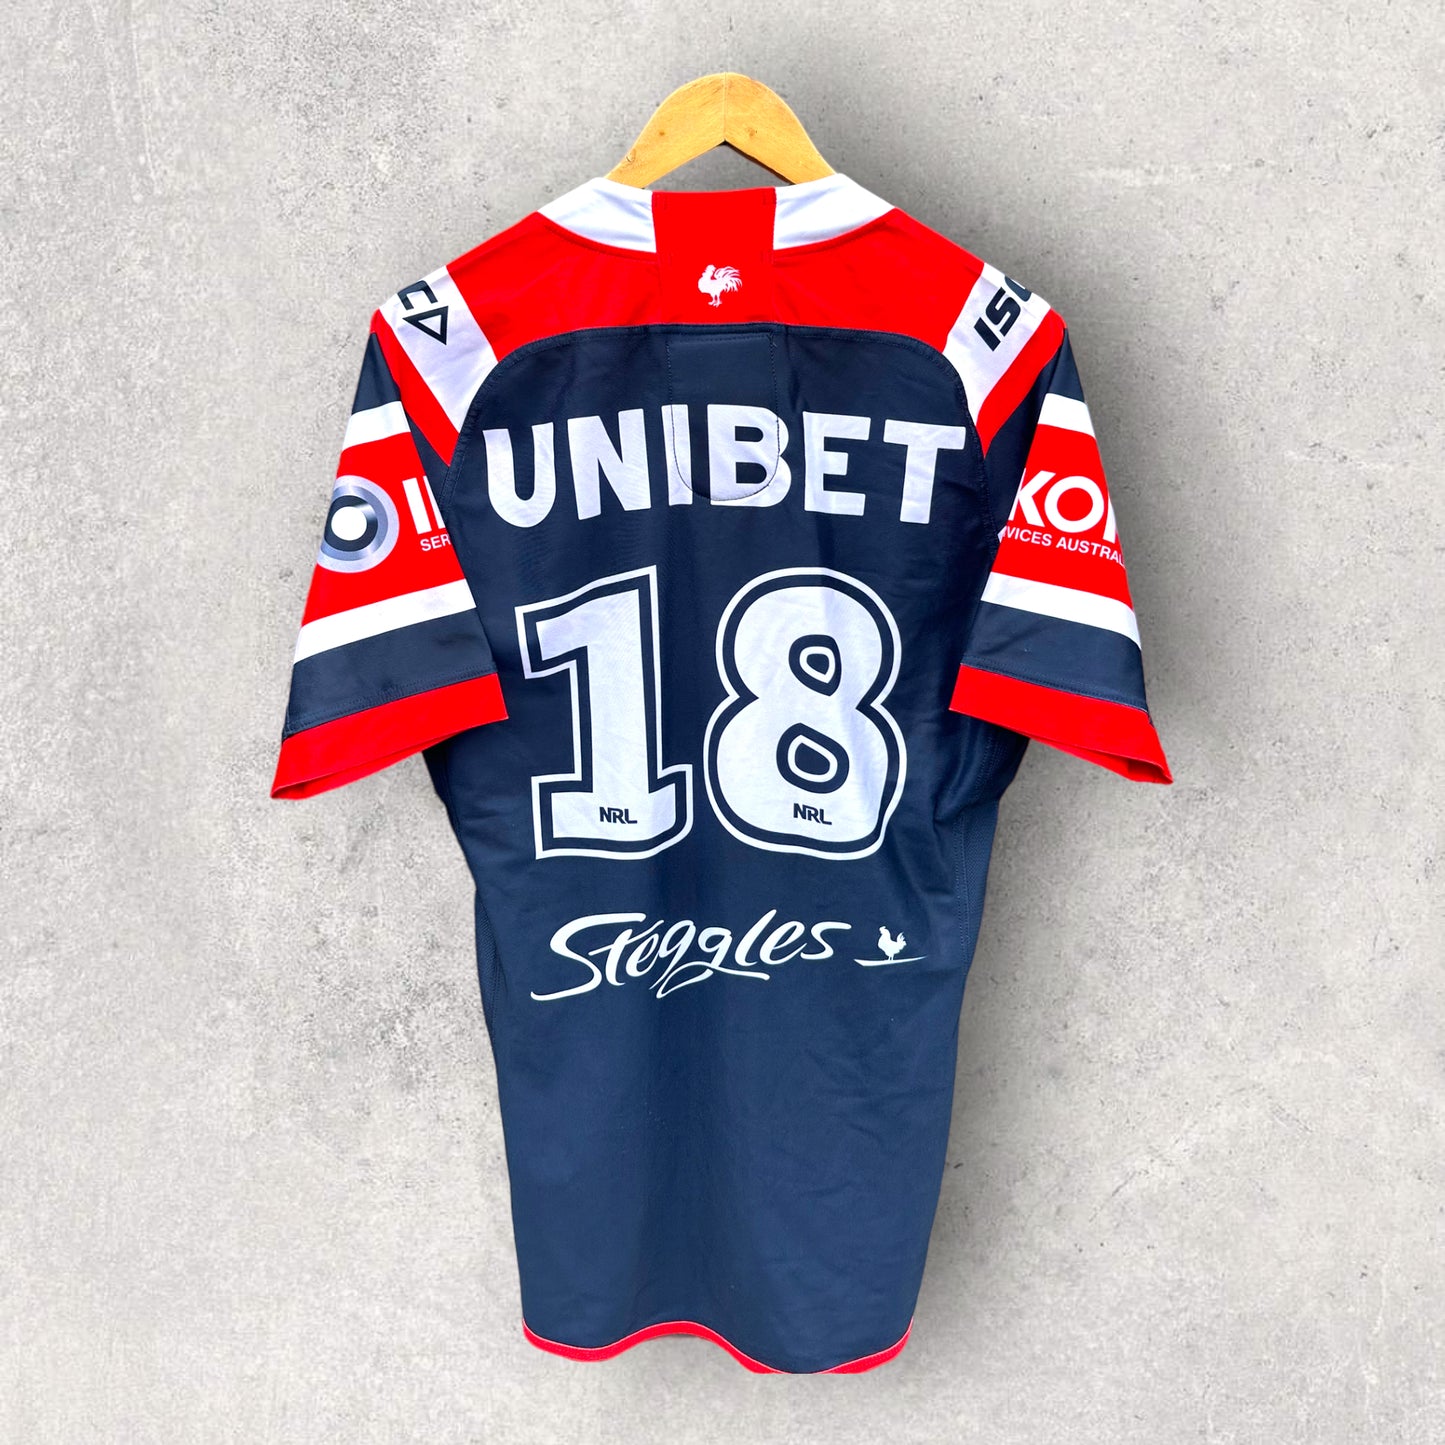 SYDNEY ROOSTERS 2021 HOME #18 PLAYER ISSUED JERSEY